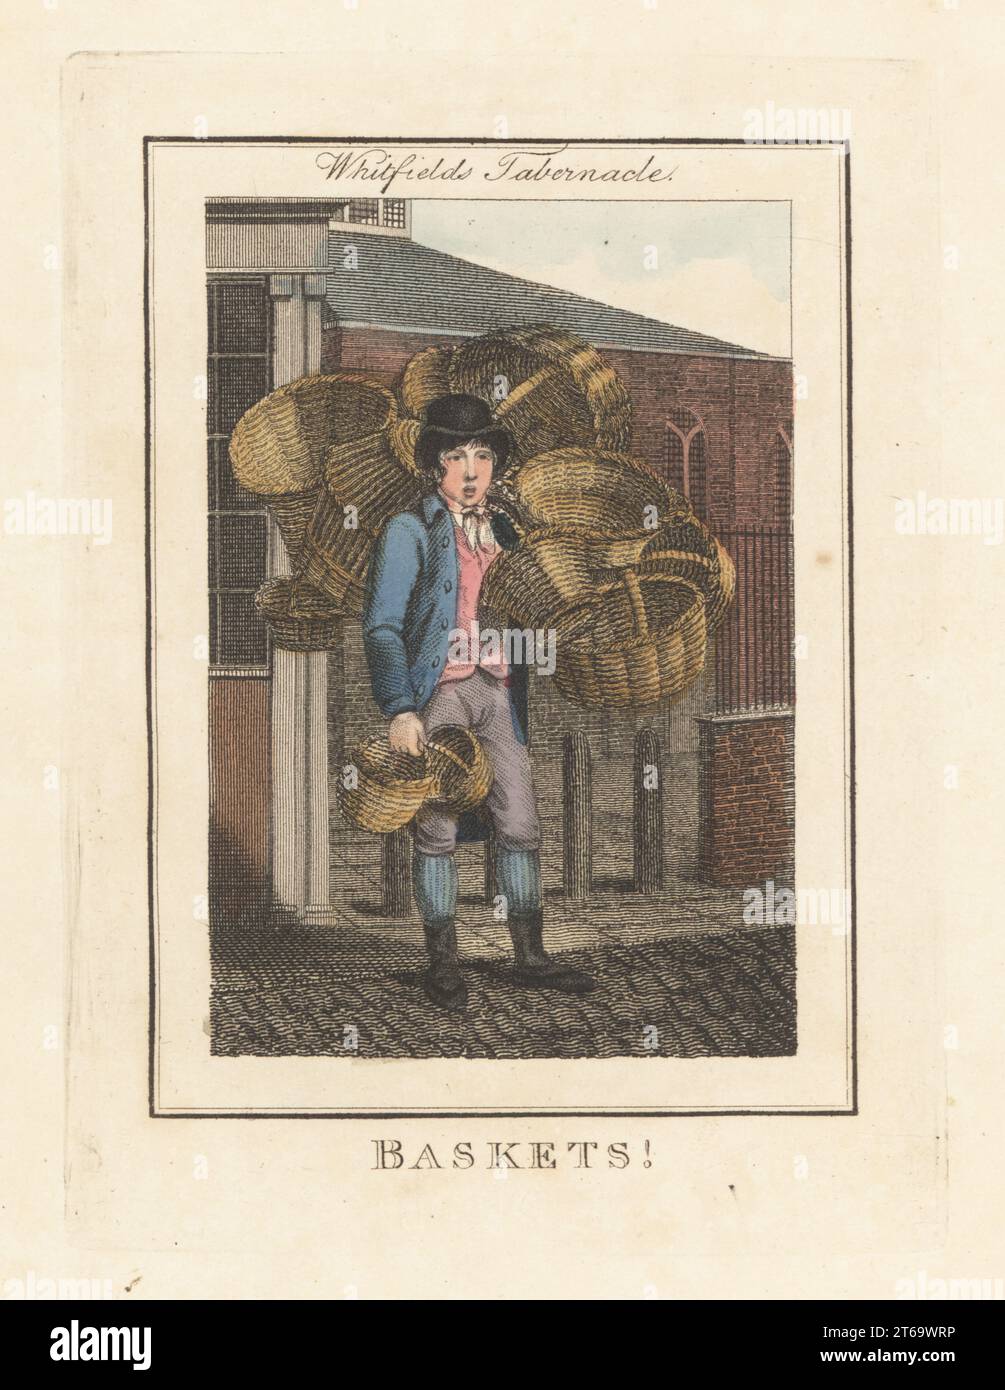 Basket seller in front of Whitfields Tabernacle, London, 1805. Basket weaver in top hat, coat, waistcoat, breeches and boots, with stock of rush and willow baskets. Moorfields Tabernacle was erected by evangelical preacher George Whitefield. Handcoloured copperplate engraving by Edward Edwards after an illustration by William Marshall Craig from Description of the Plates Representing the Itinerant Traders of London, Richard Phillips, No. 71 St Pauls Churchyard, London, 1805. Stock Photo